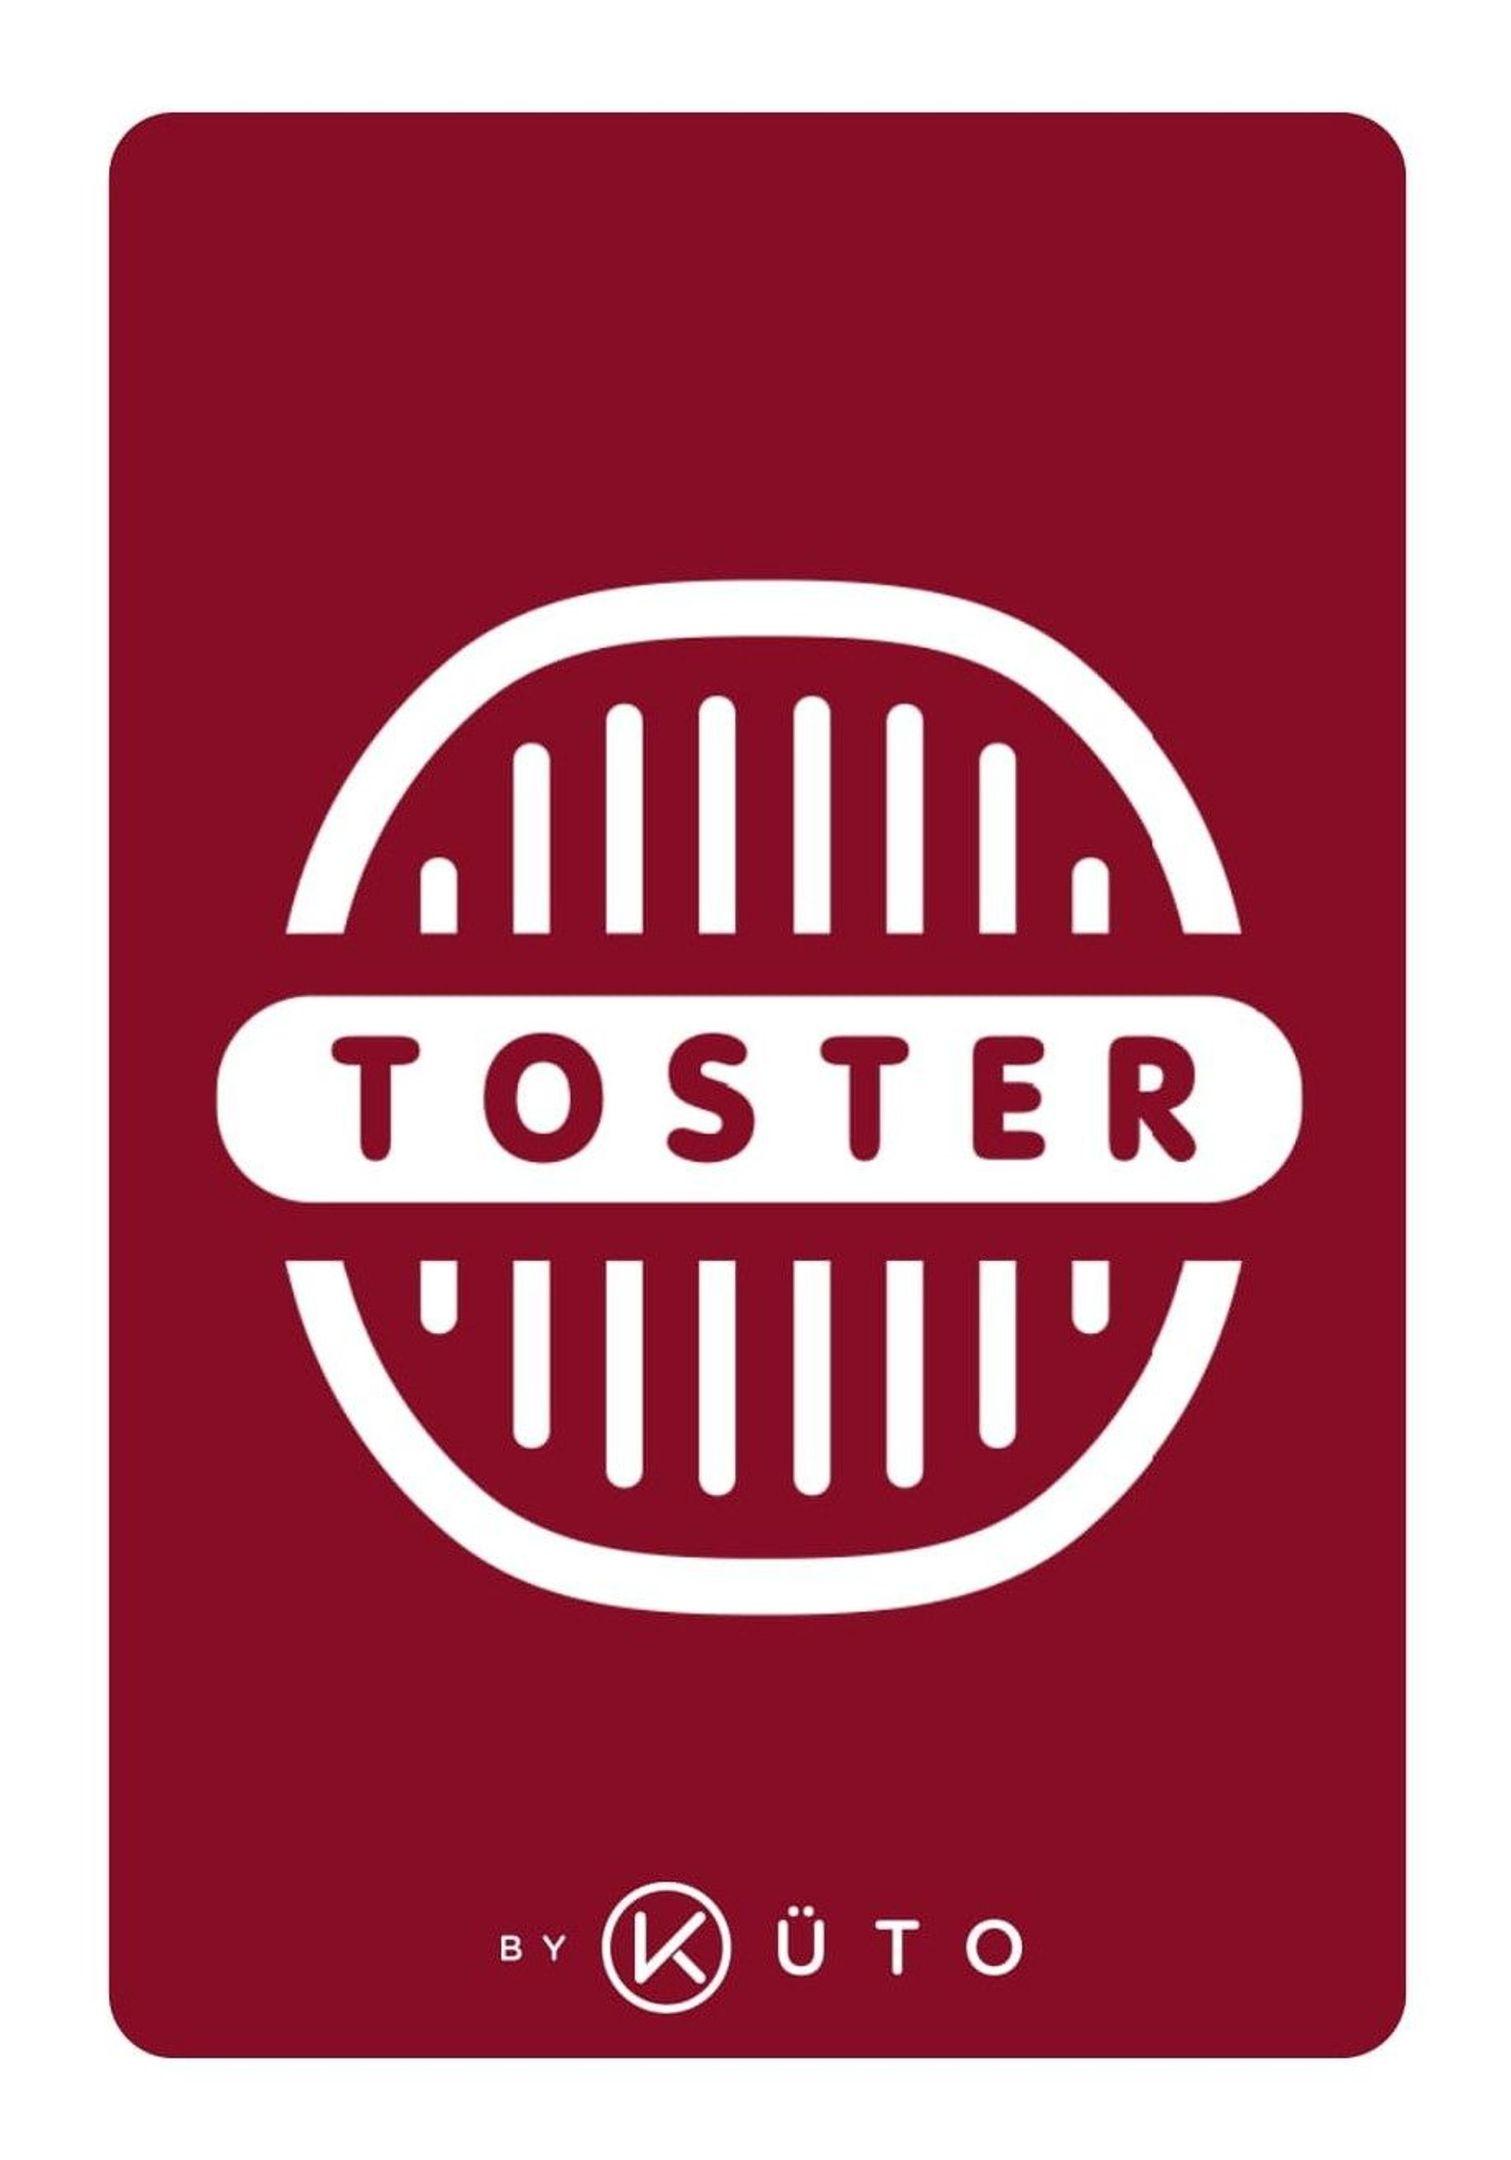 tosterbykuto